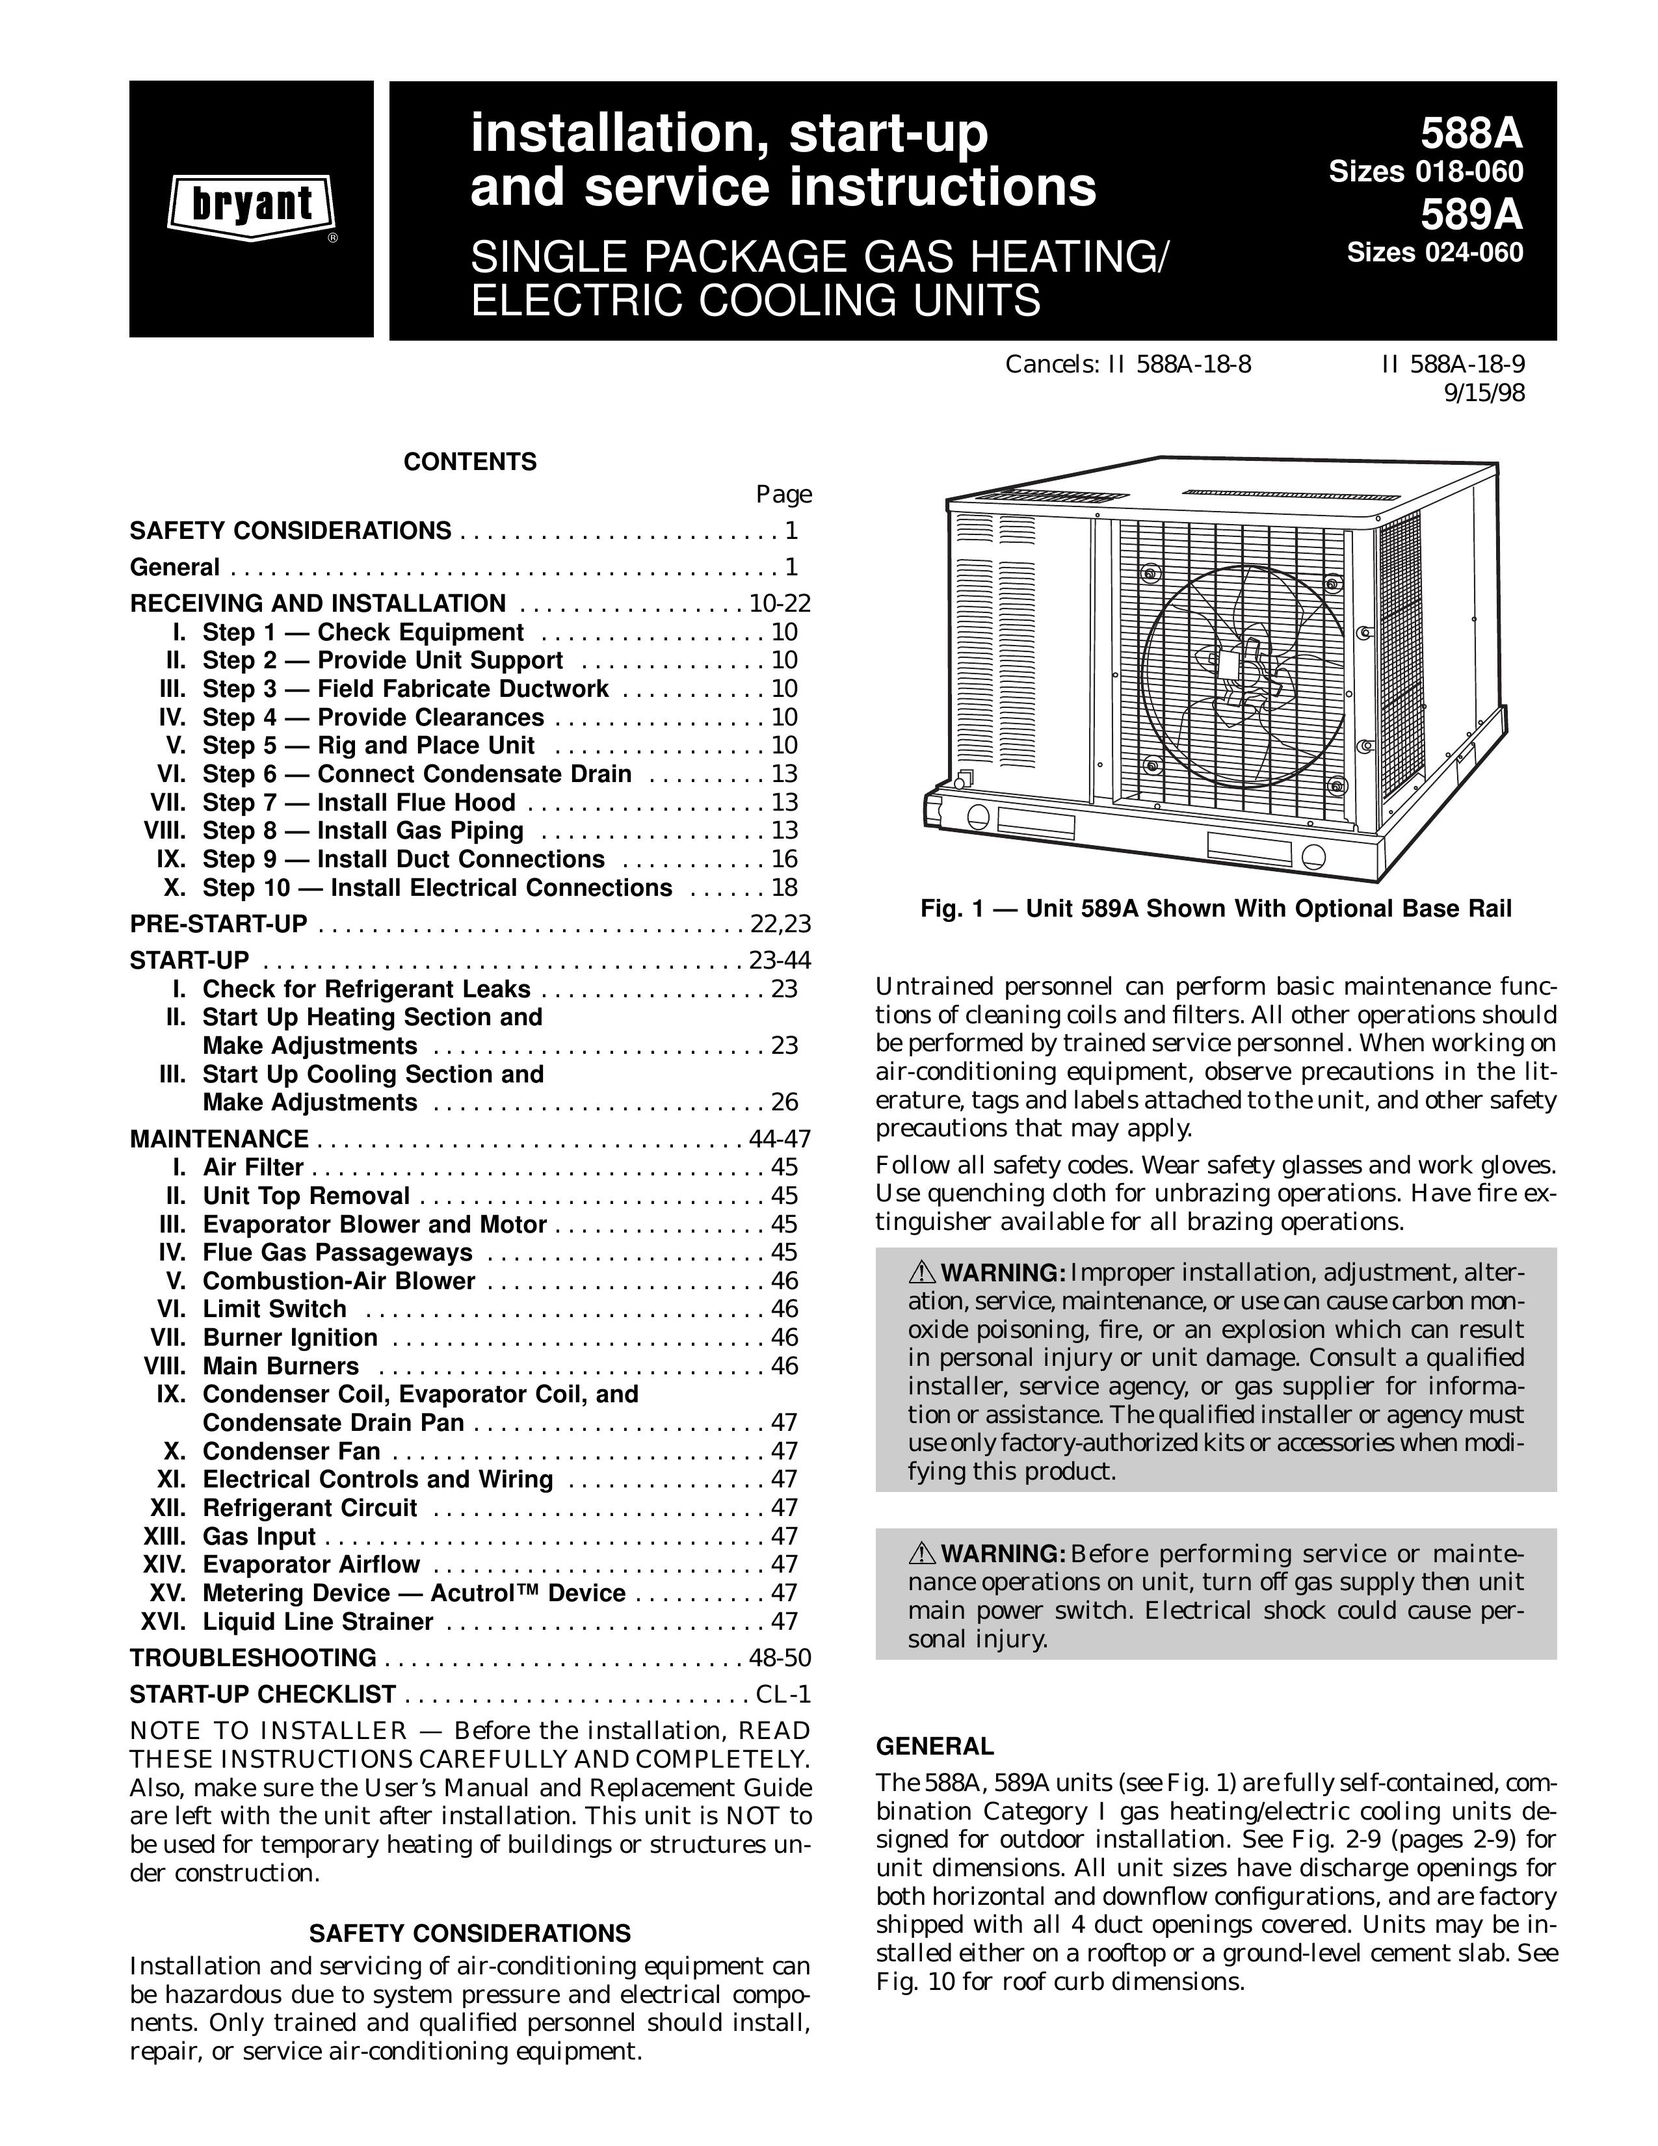 Bryant 589A Gas Heater User Manual